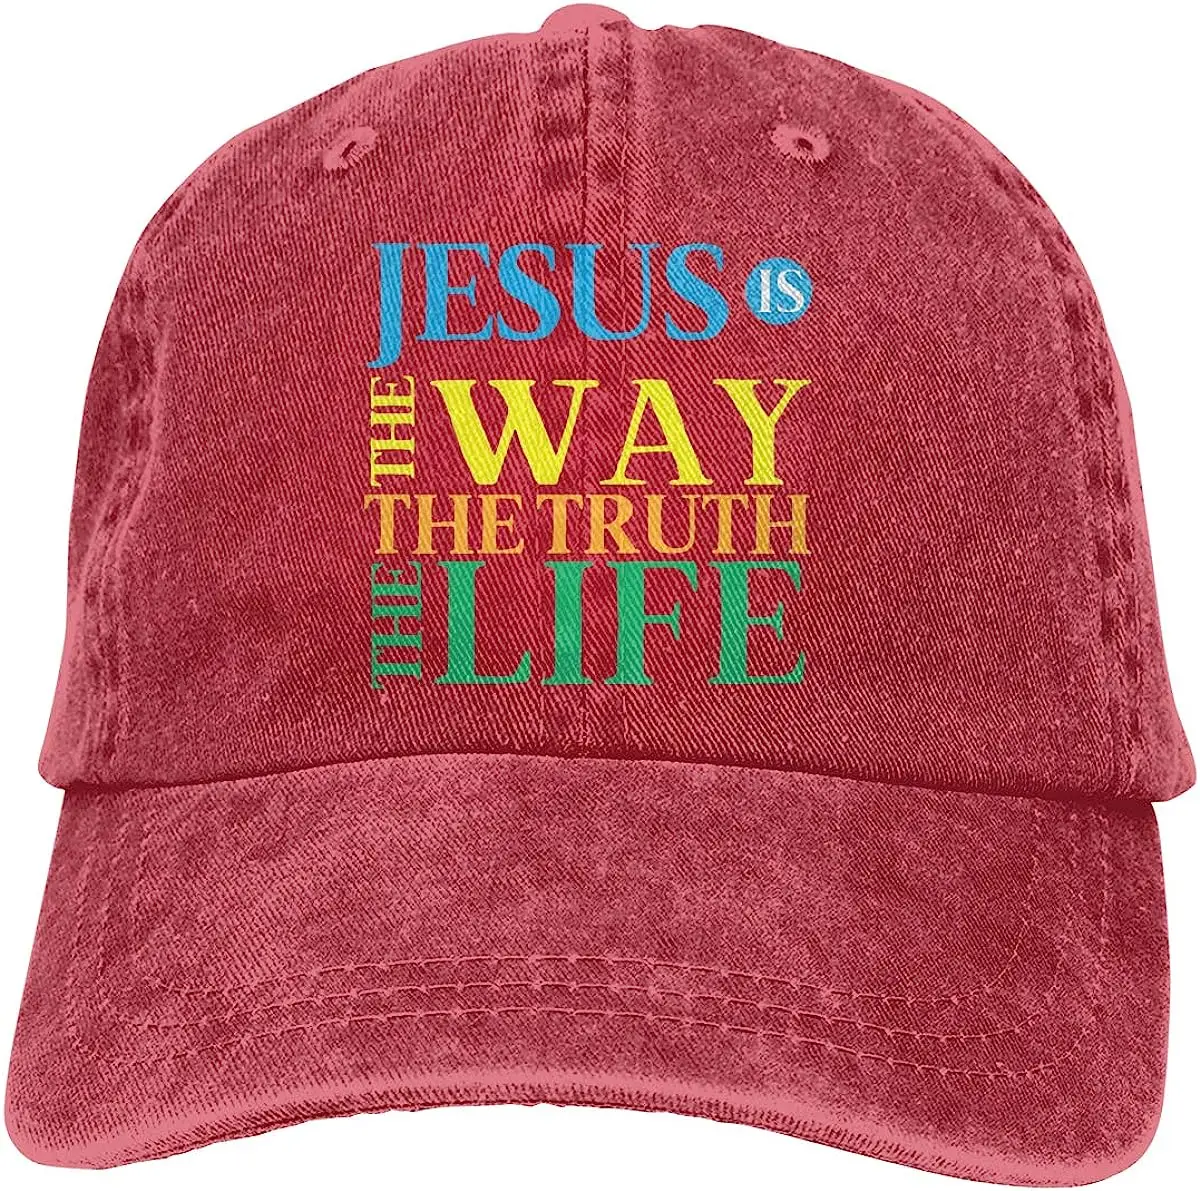 

Hot Fashion Denim Cap Jesus The Way The Truth The Life Baseball Dad Cap Adjustable Classic Sports For Women Men Travel Gift